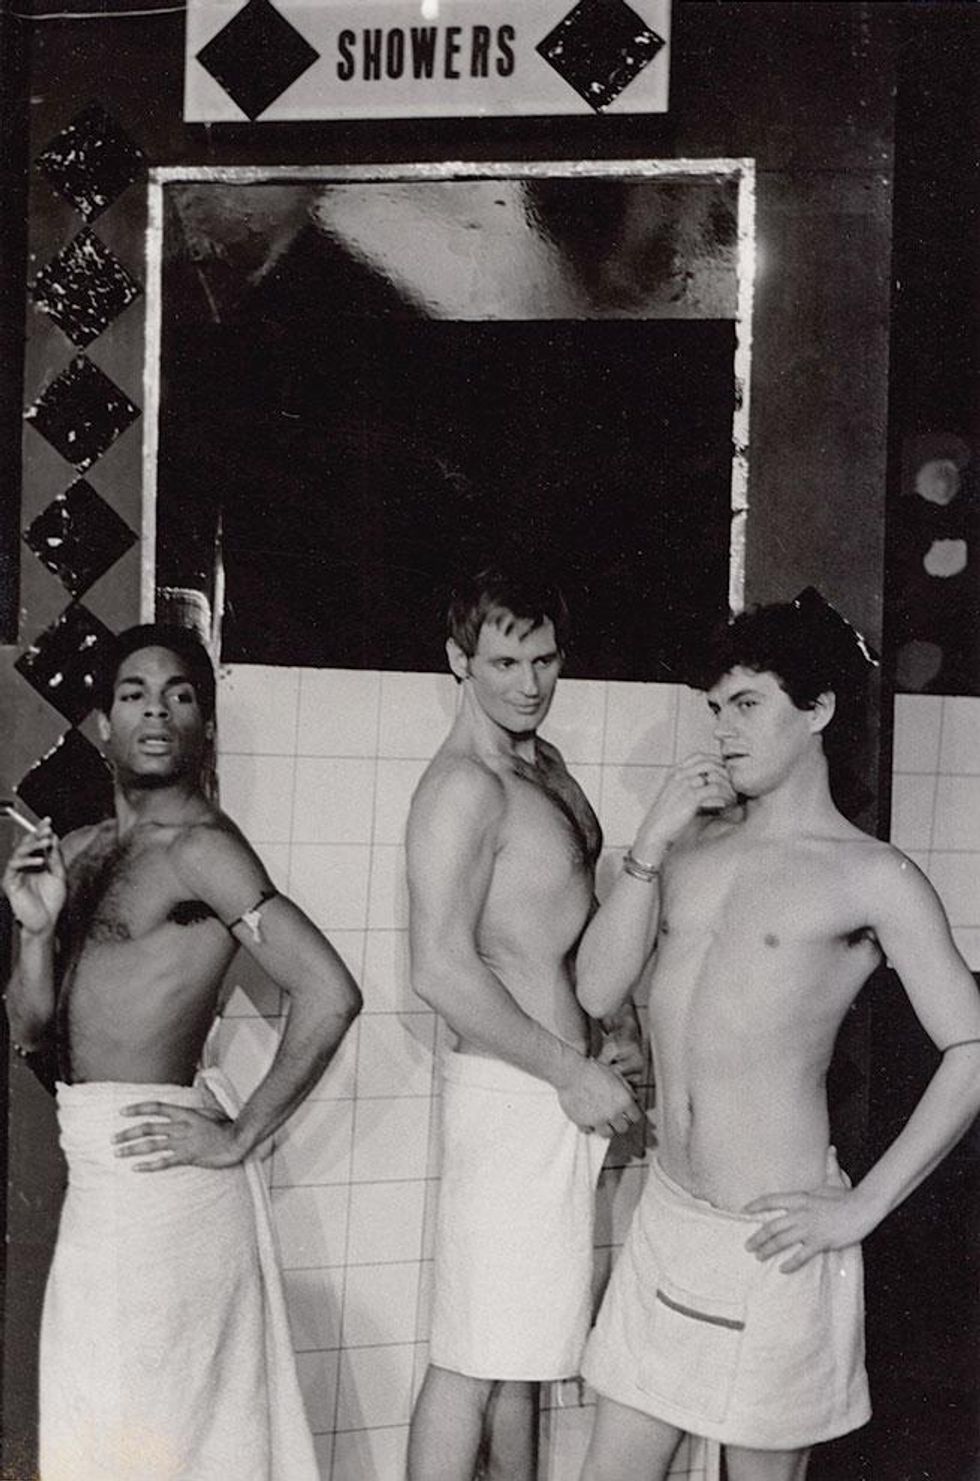 Nude Vintage Nudism - 20 Images From the Naked Age of Erotic Gay Theater